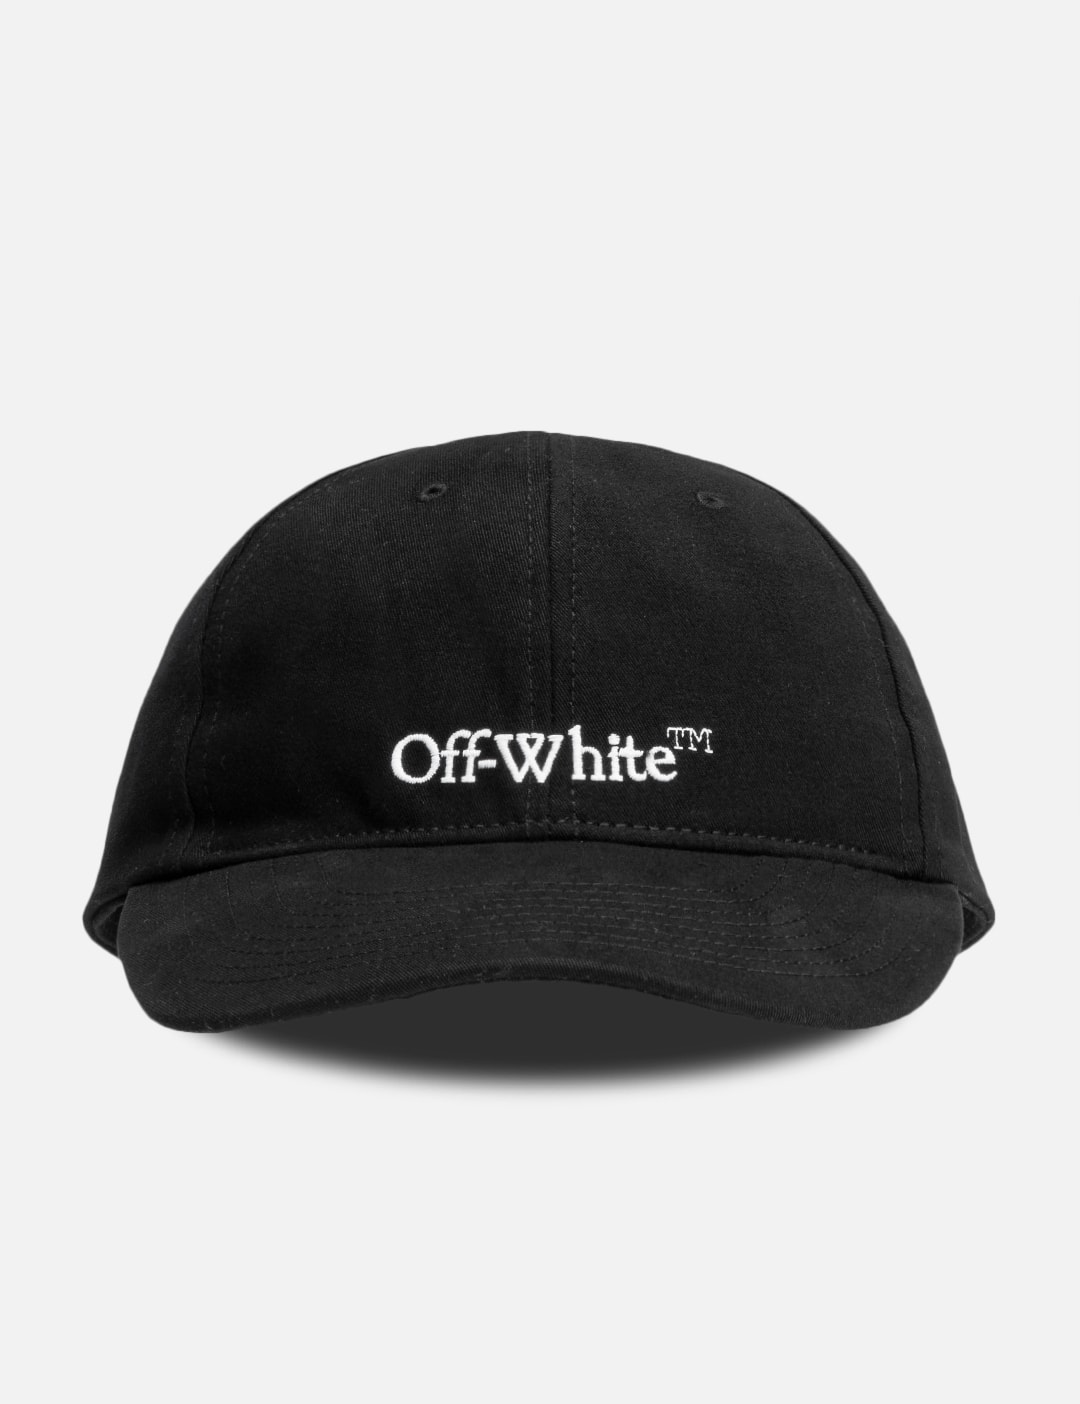 Off-White™ - Bookish Baseball Cap | HBX - Globally Curated Fashion and ...